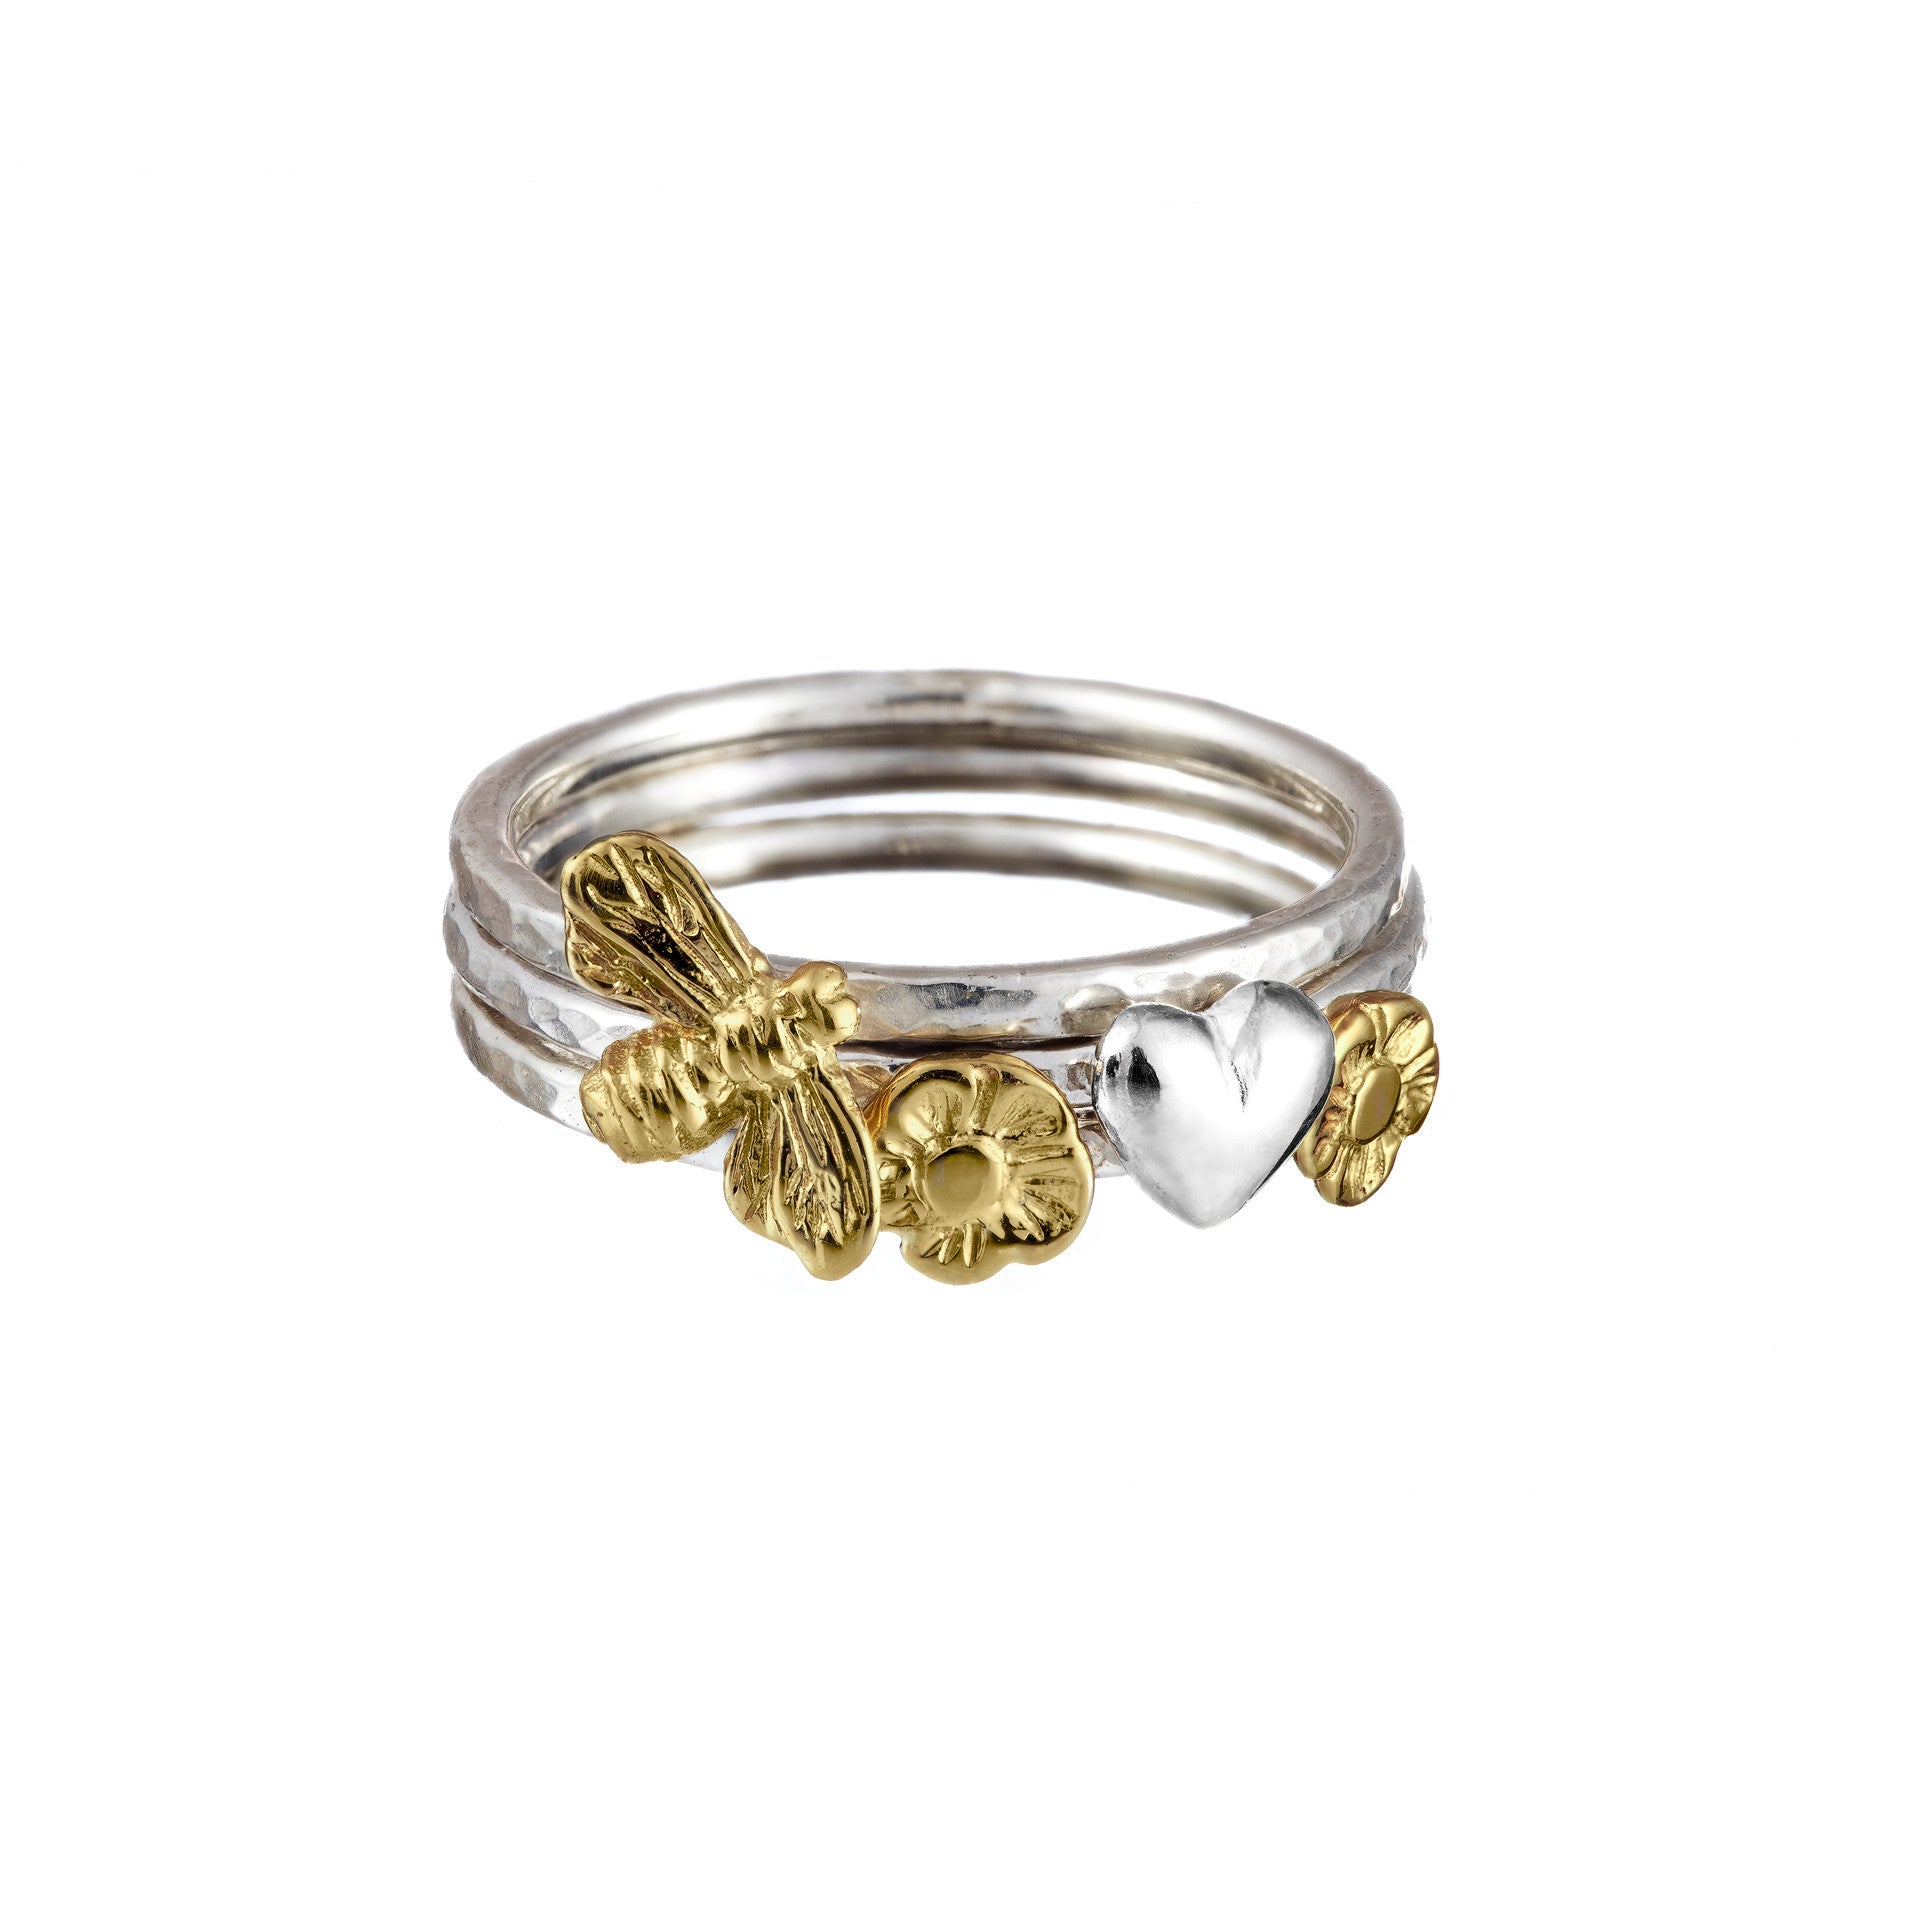 Stacking rings handcrafted from sterling silver with 9ct Gold Celtic Symbols.